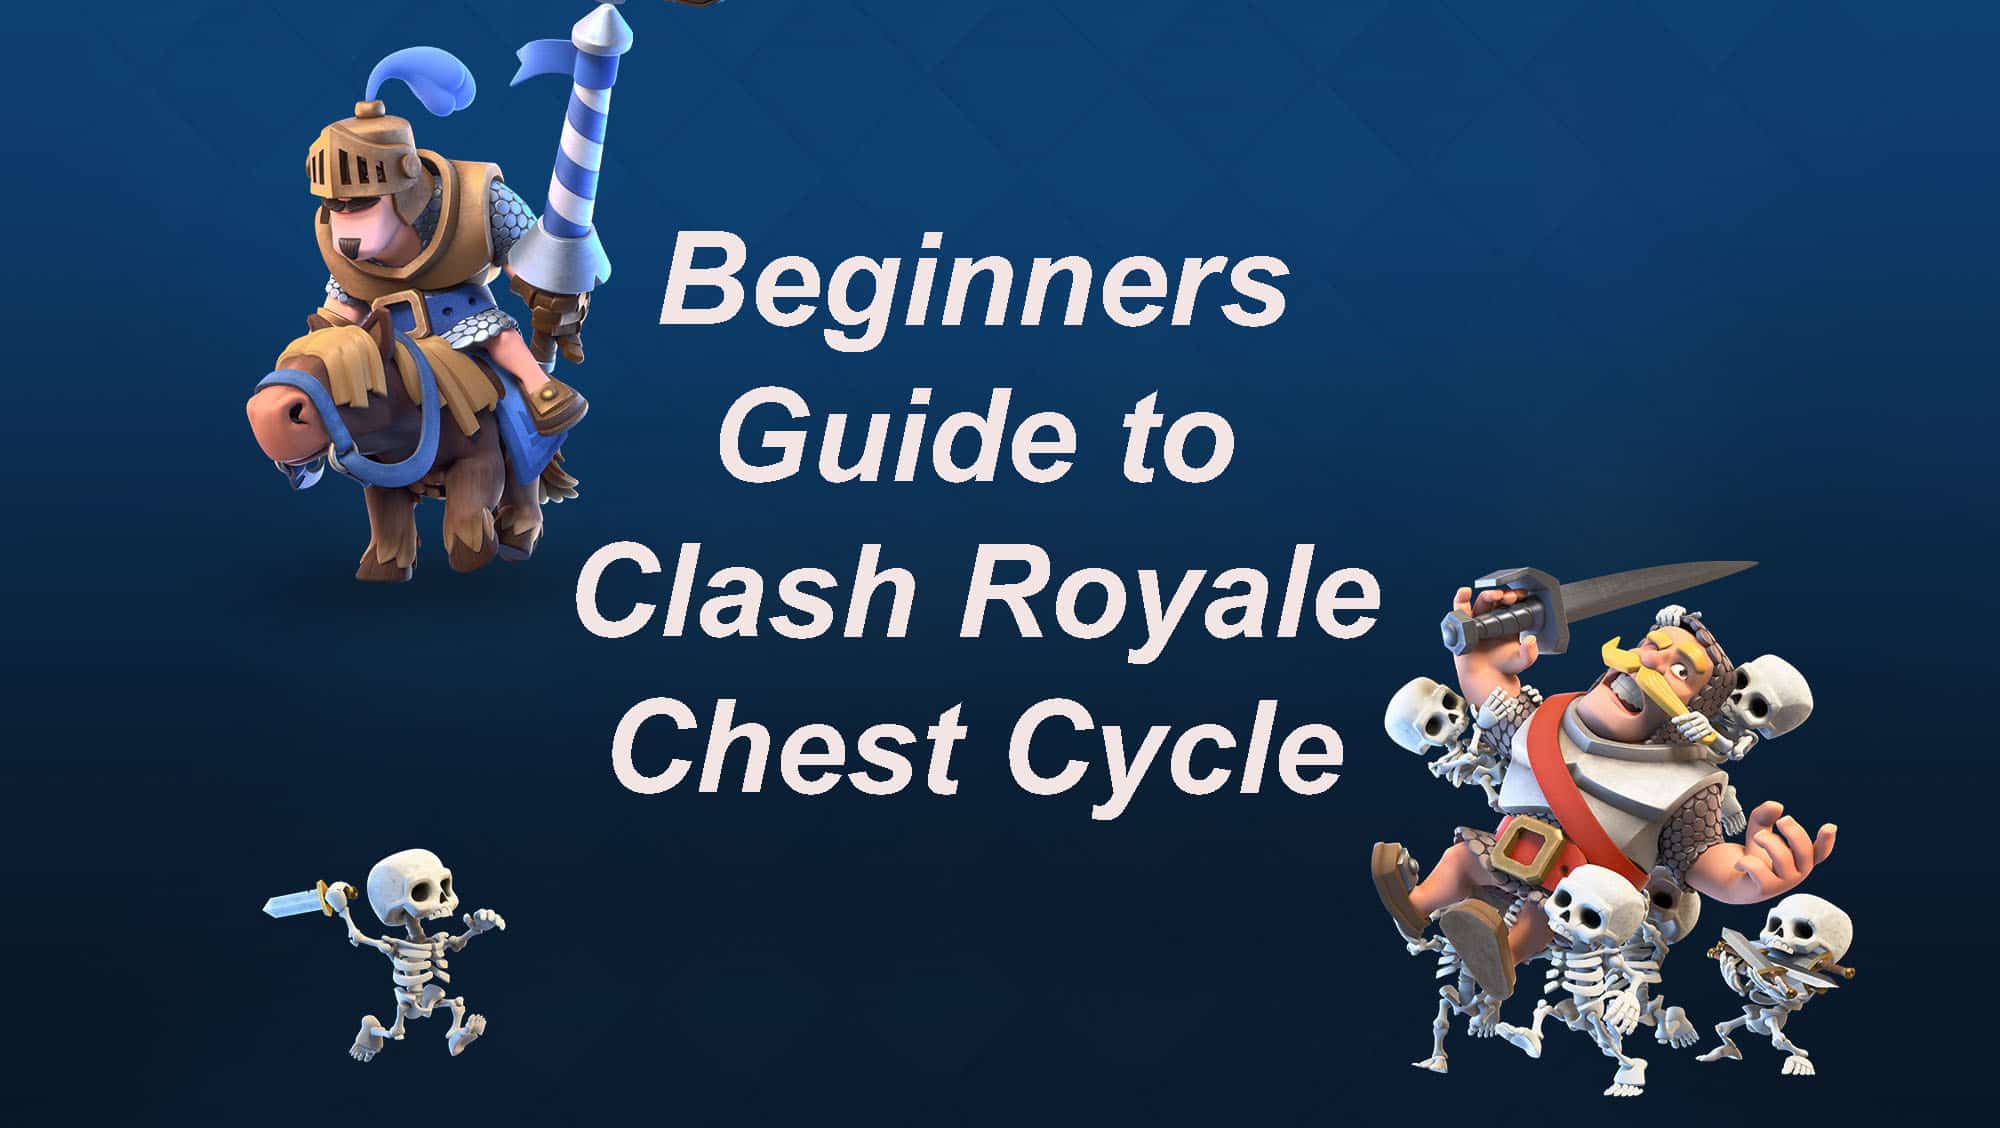 Beginner’s Guide to the Clash Royale Chest Cycle